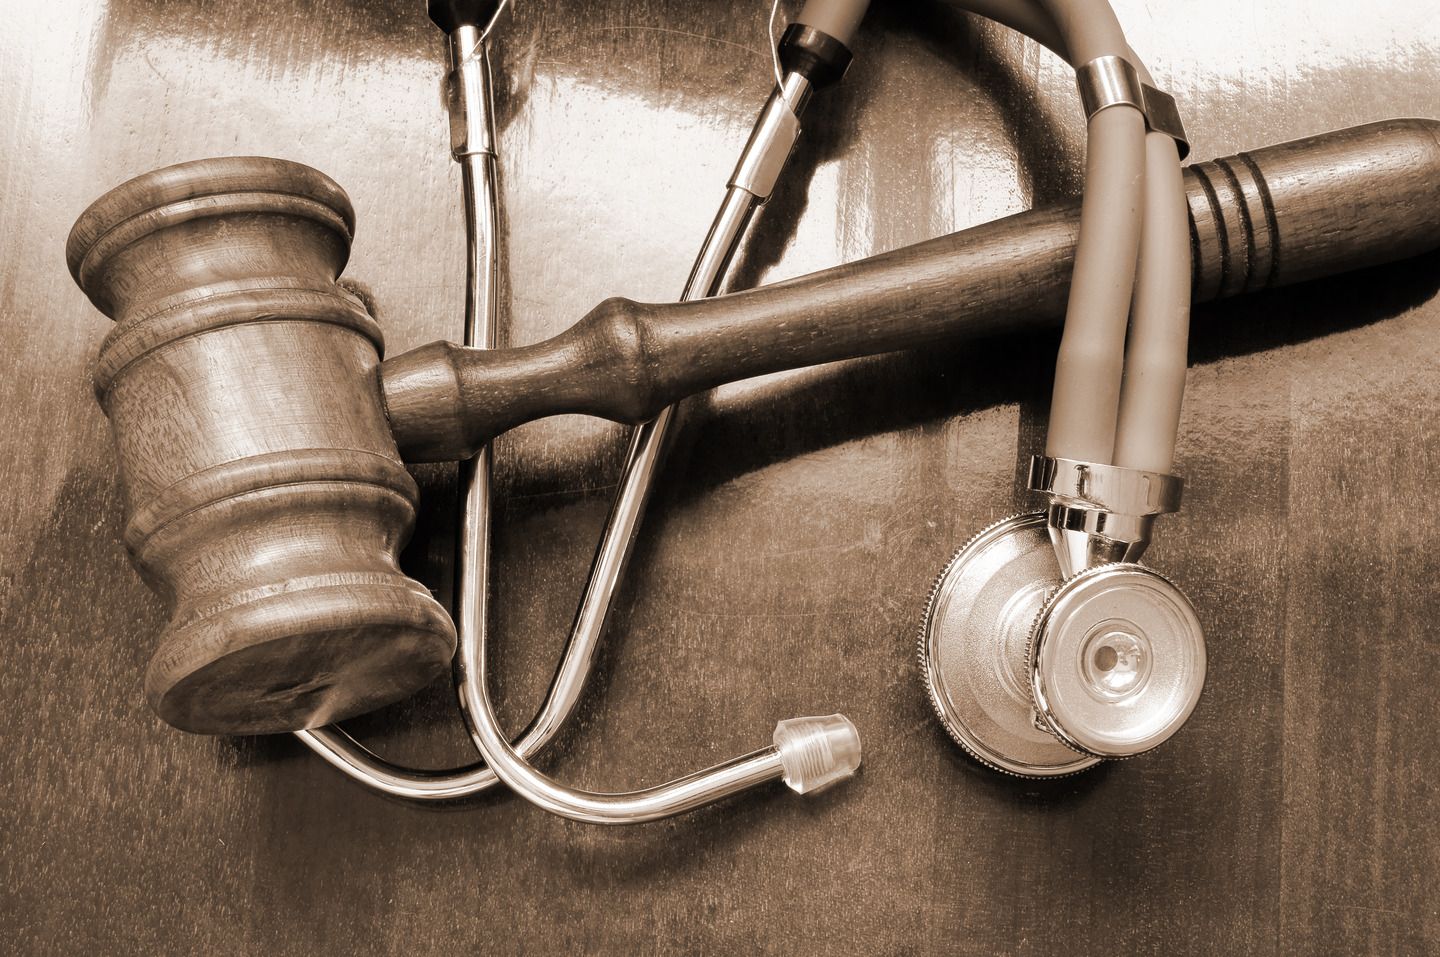 grounds for medical malpractice cases